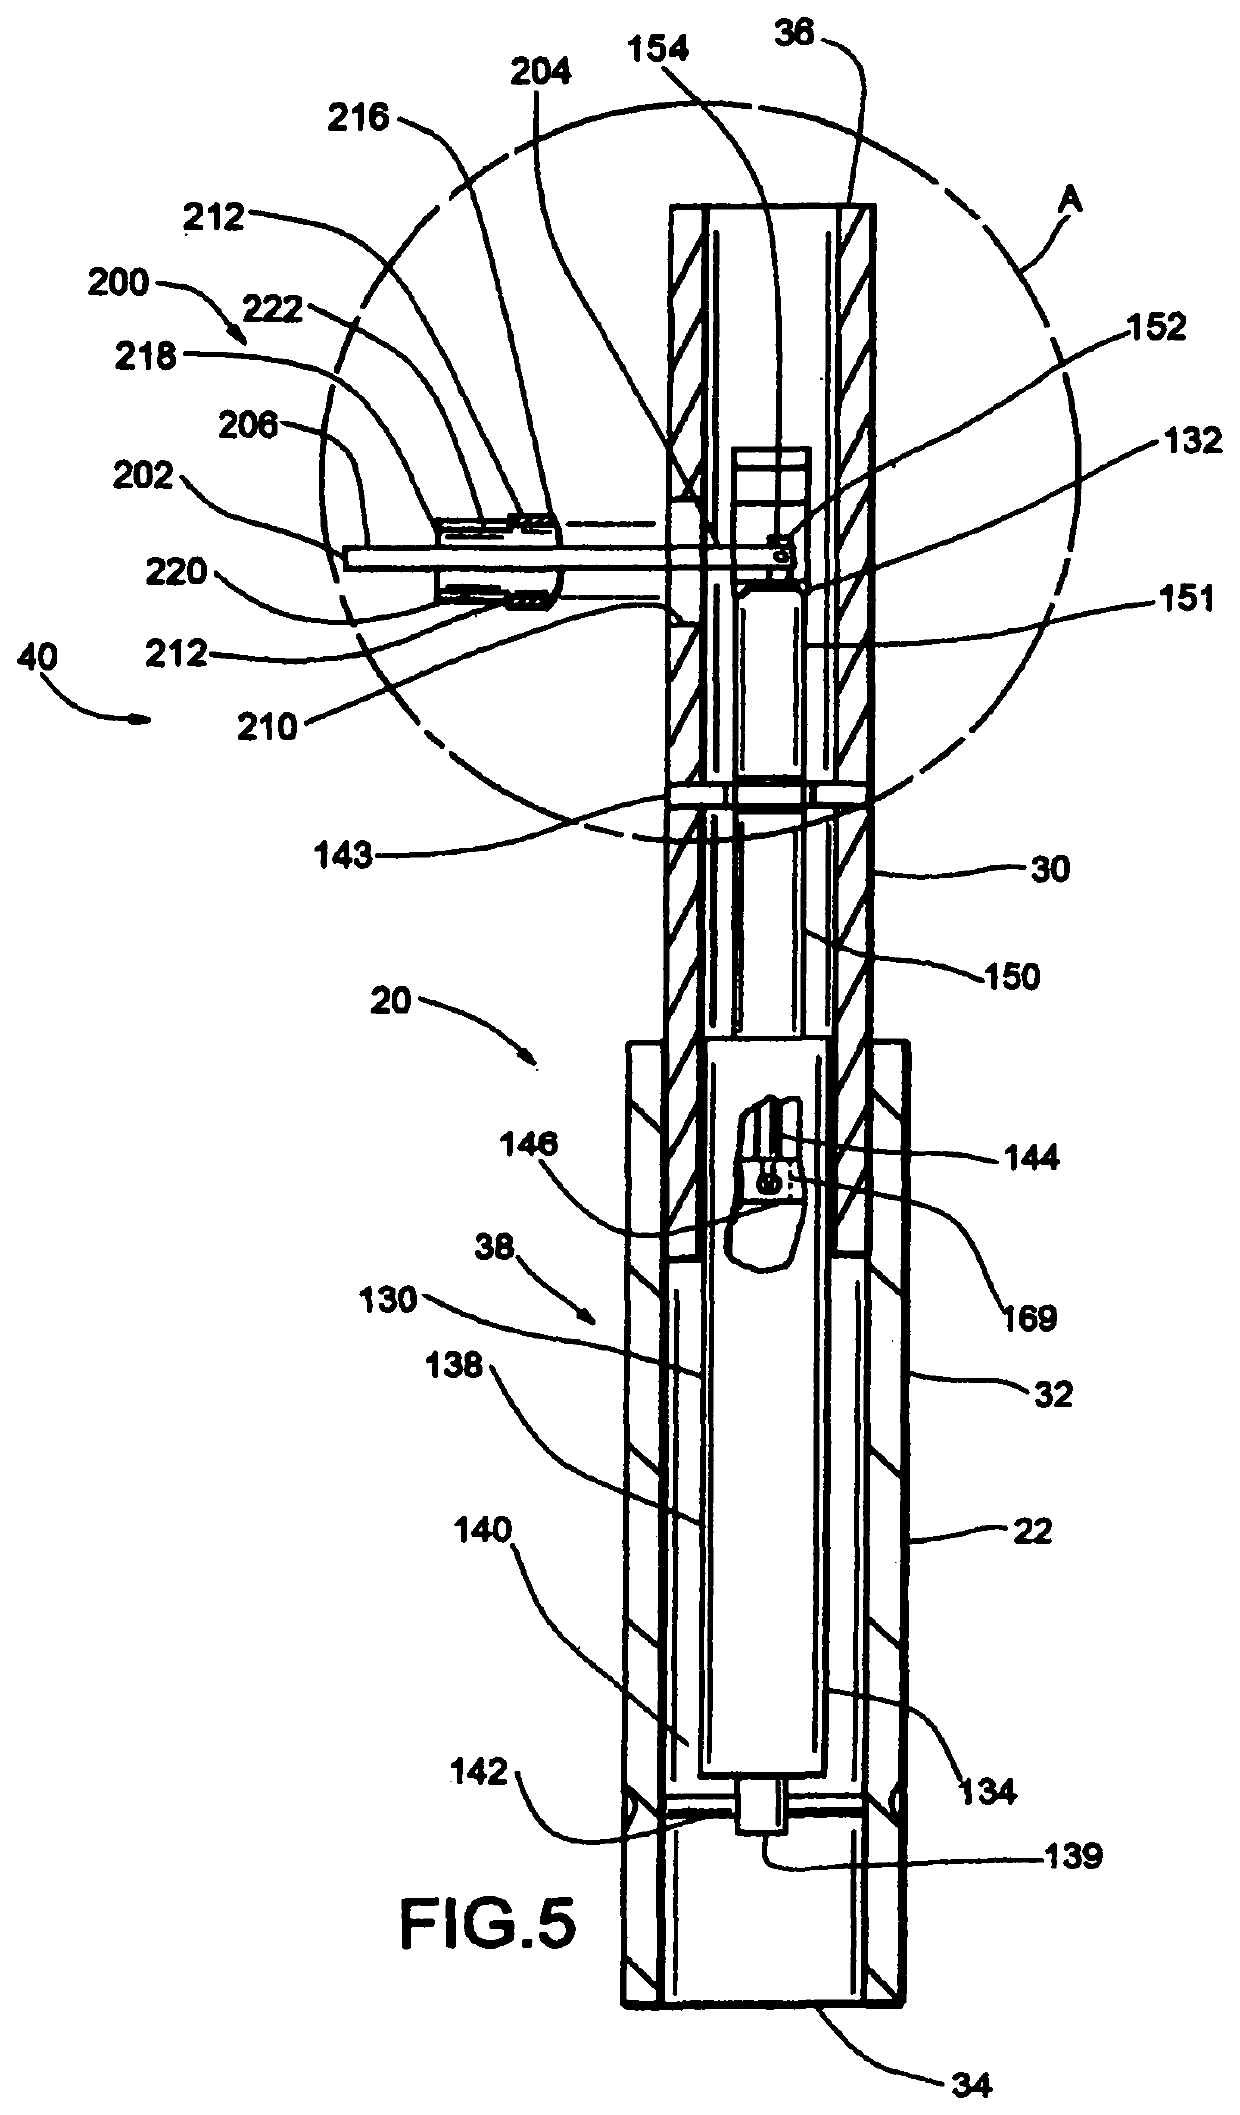 Elongated support apparatus for lifting an item to or supporting an item in an elevated condition